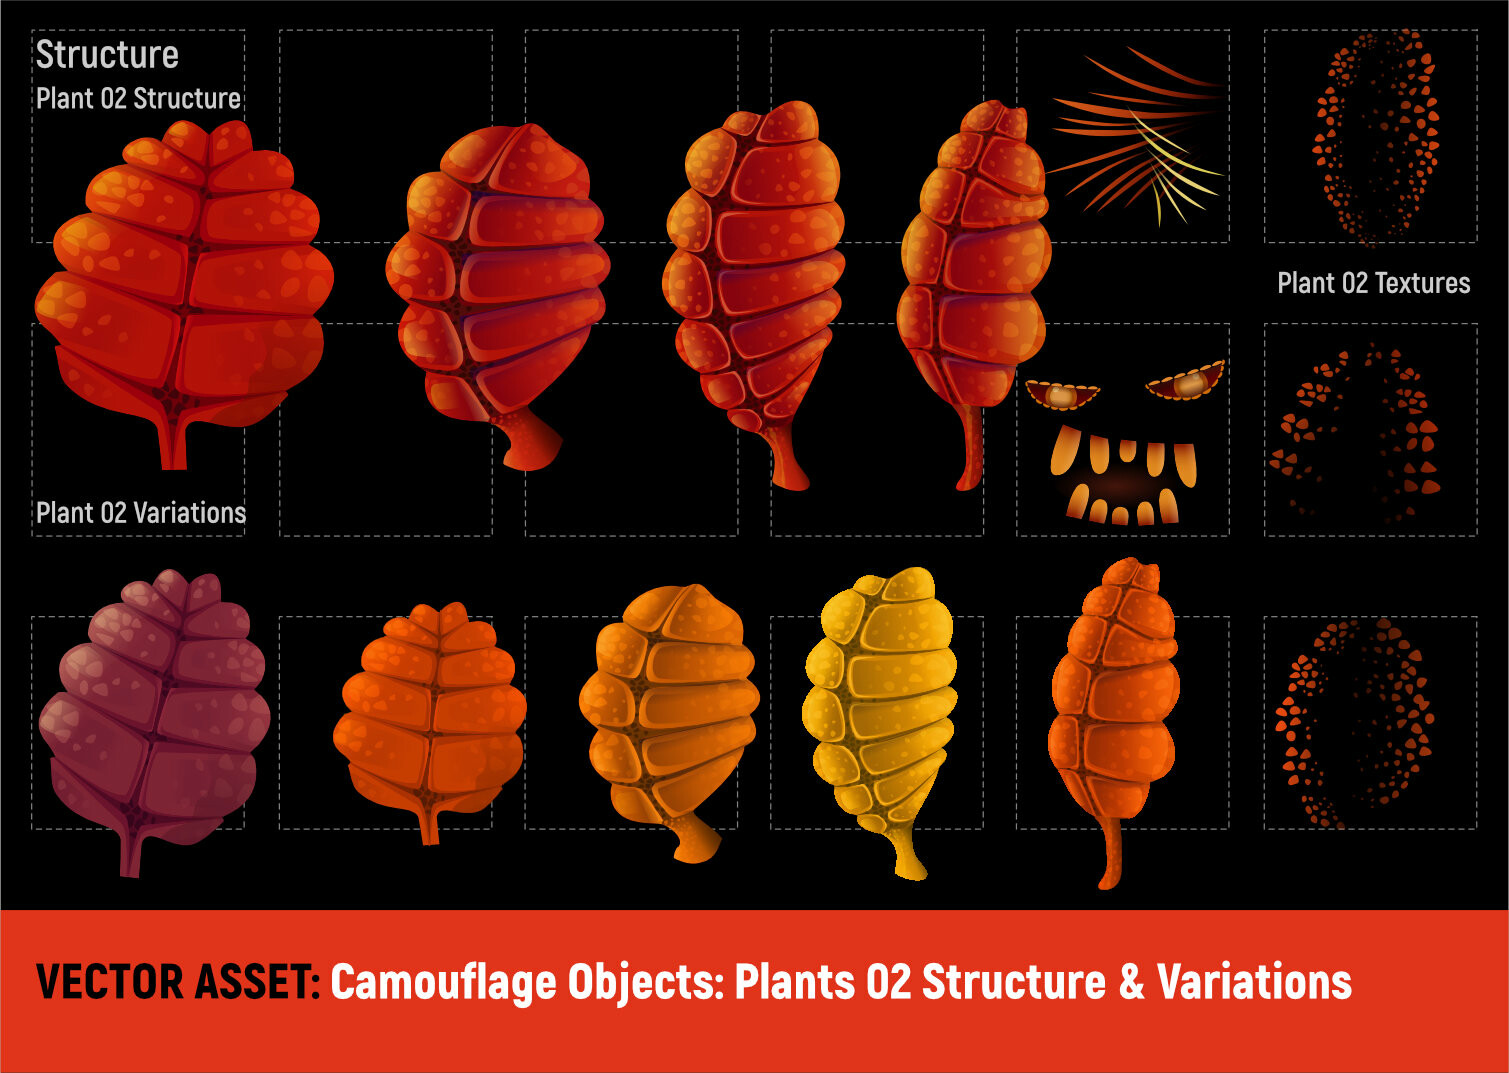 Vector Assets
Camouflage I Objects: Plants Structure &amp; Variations